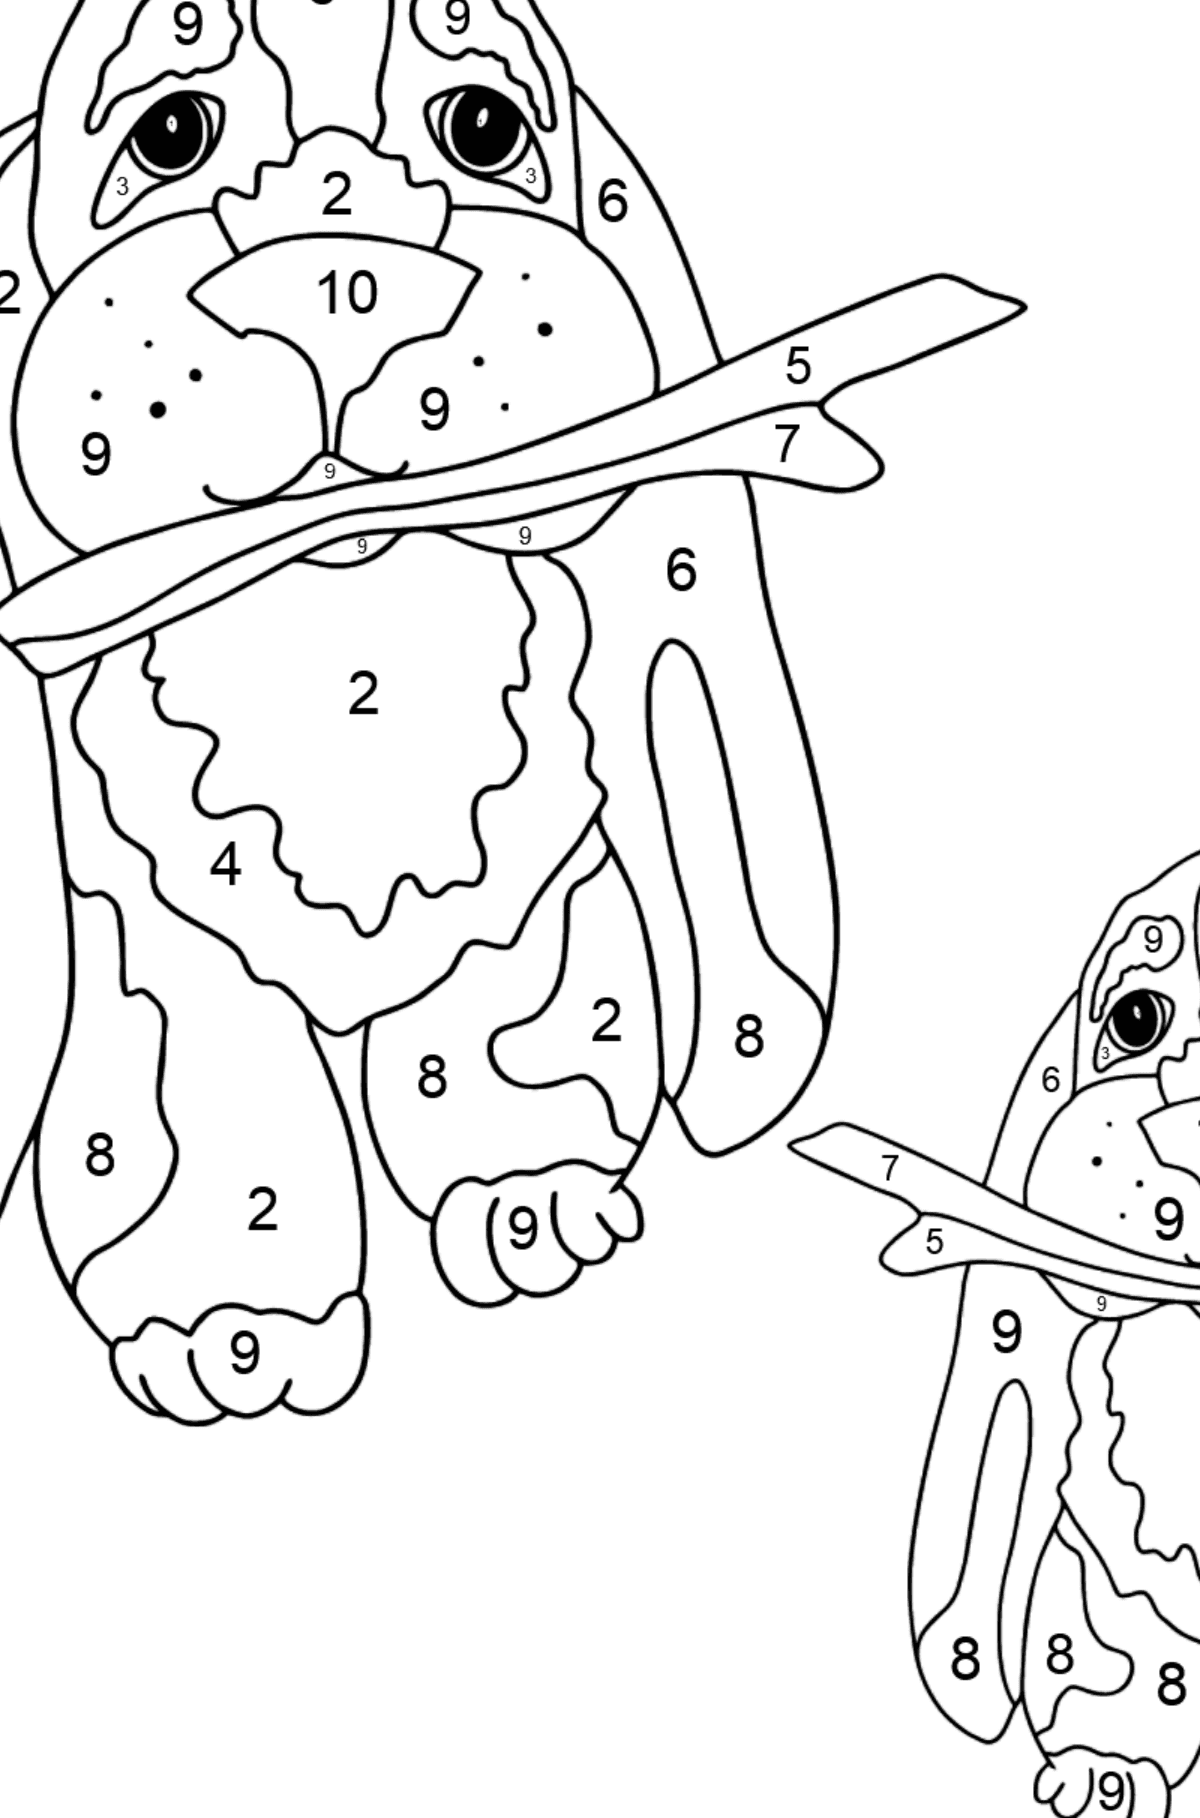 Coloring Page - Two Dogs are Playing with Sticks - Coloring by Numbers for Kids